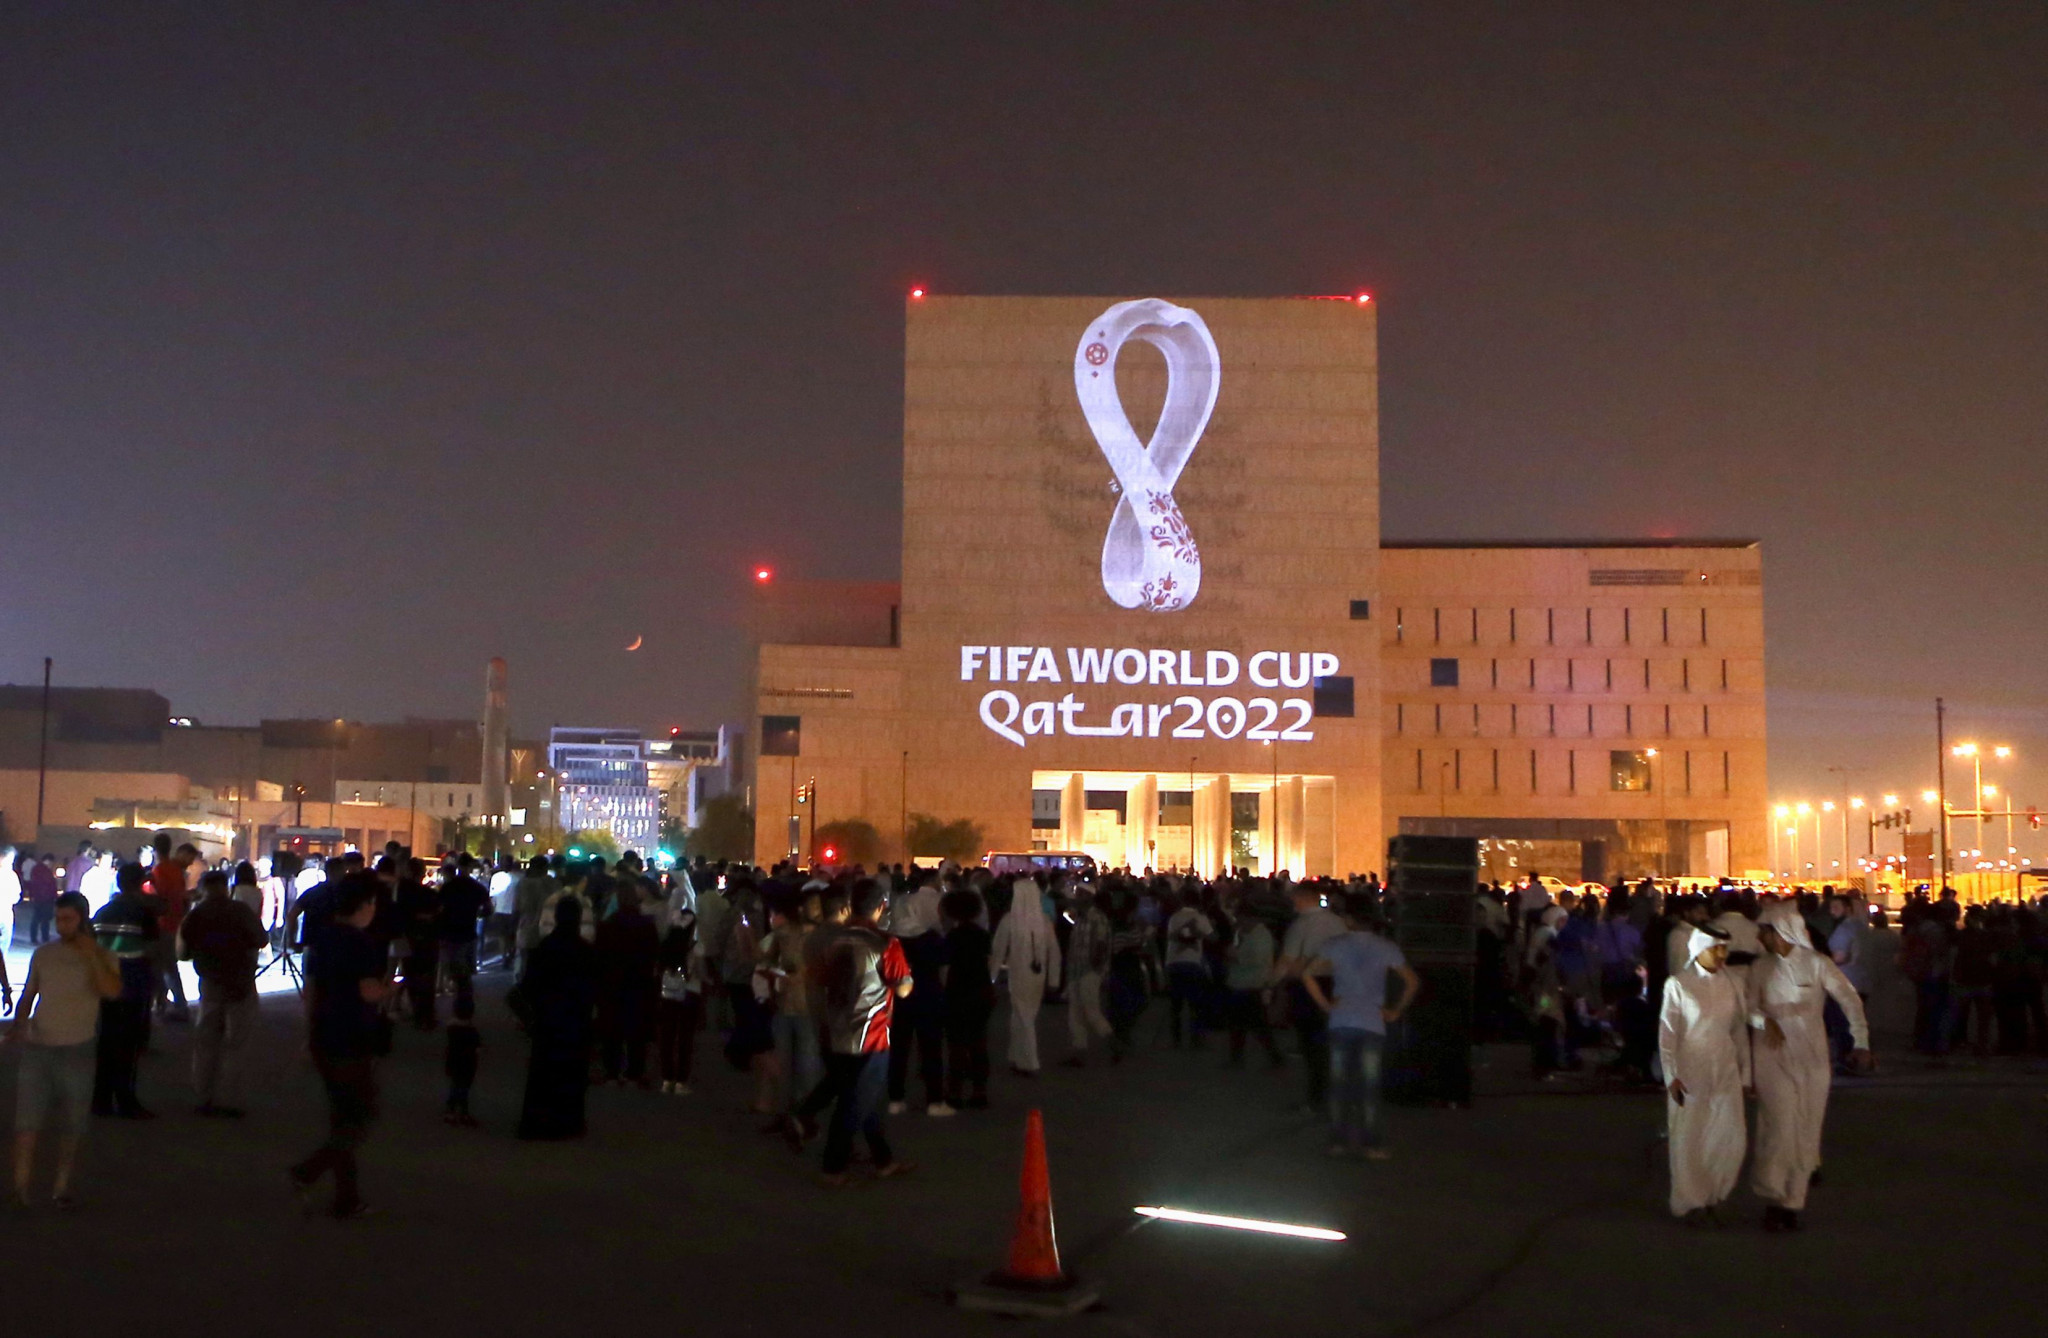 Groups call for progress to reassure LGBTIQ+ fans prior to Qatar 2022 FIFA World Cup